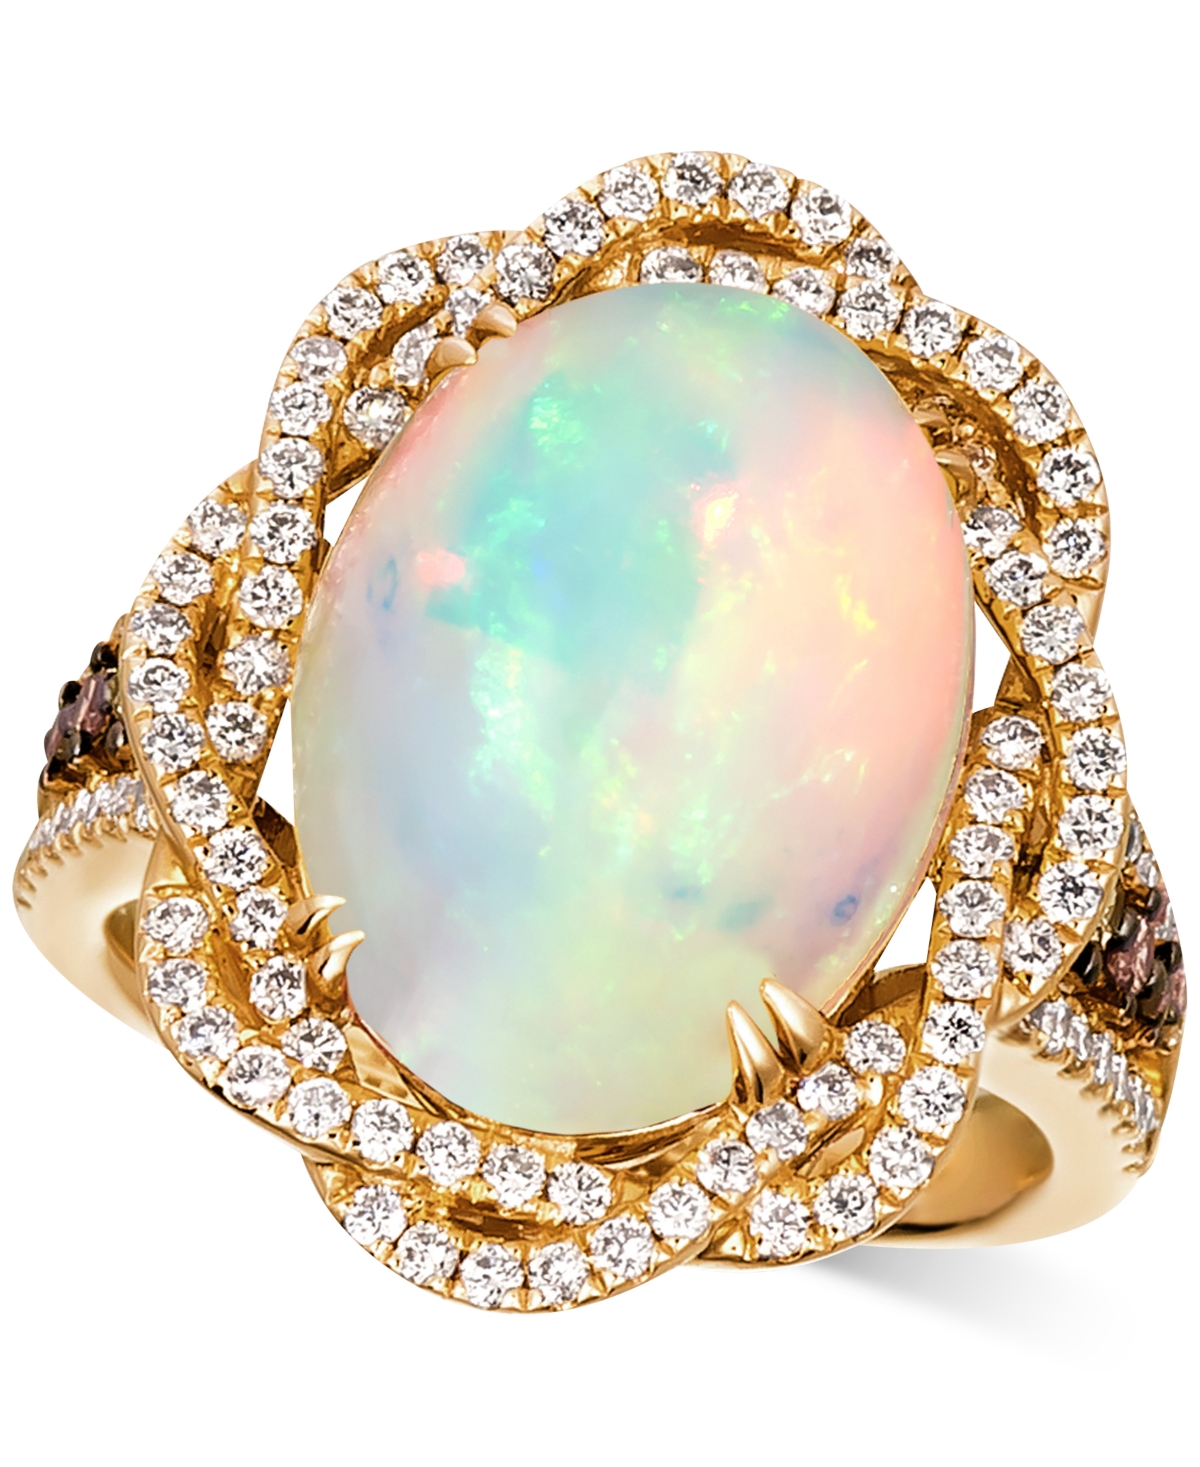 Le Vian Neopolitan Opal (4-1/2 Ct. T.w.) & Diamond (1 Ct. T.w.) Statement Ring In 14k Rose Gold (also Availa In Yellow Gold